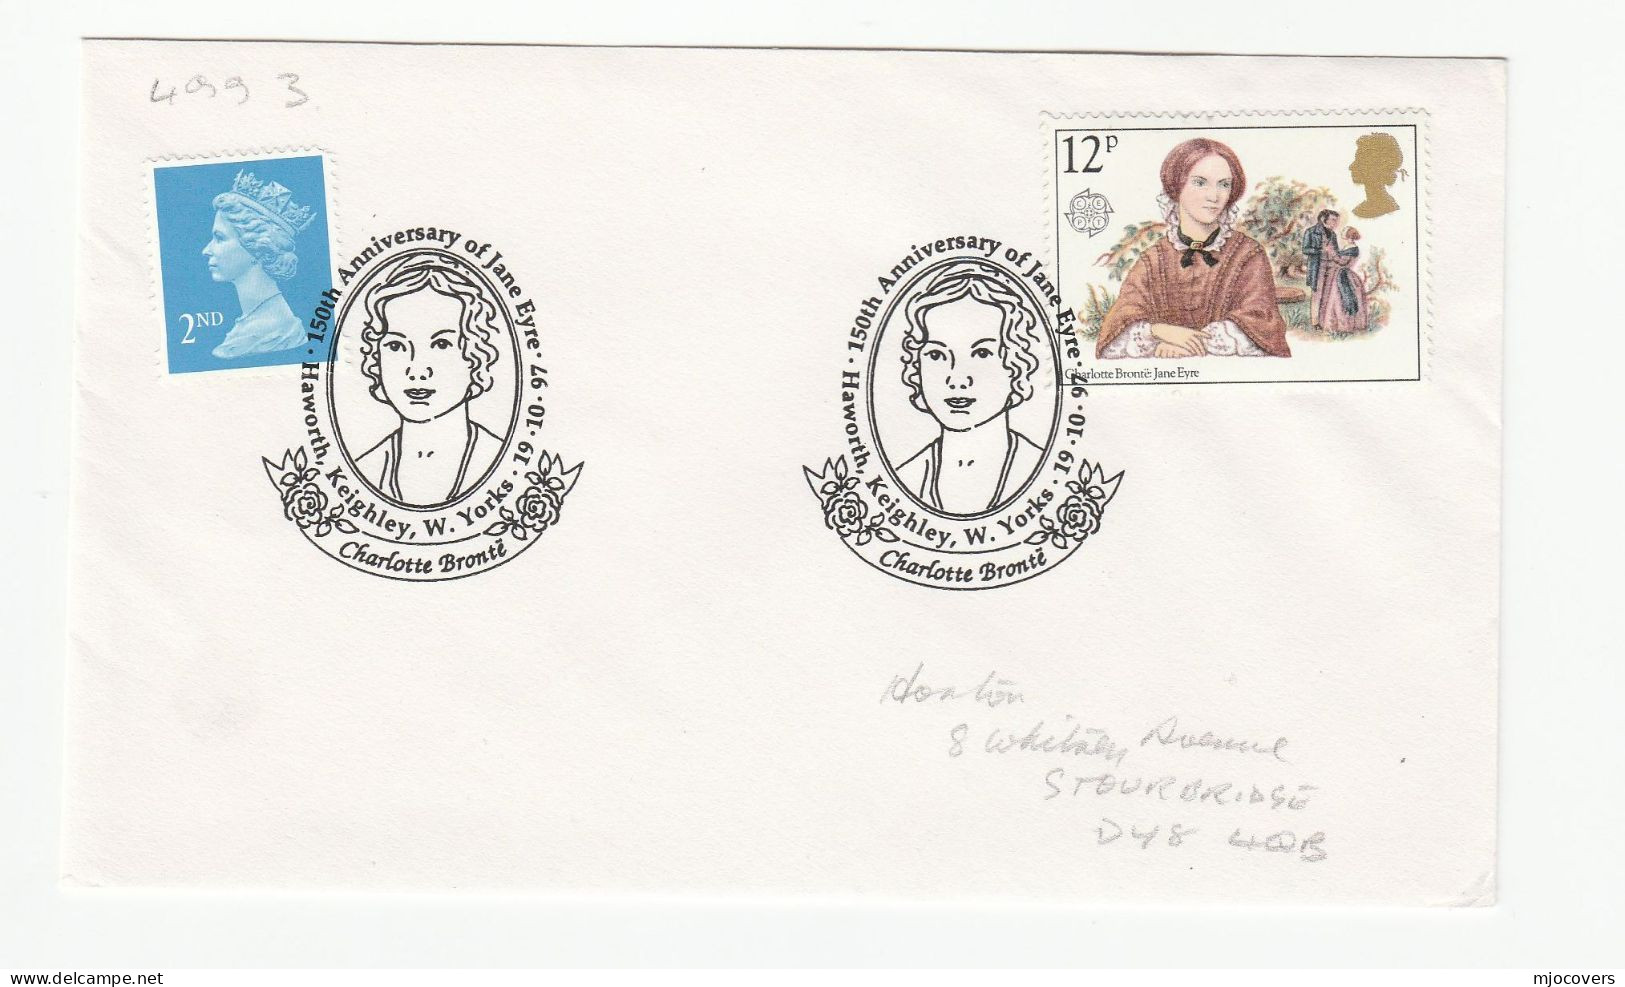 Cover JANE EYRE Novel  150th Anniv Haworth Keighley GB Charlotte BRONTE Fdc  Stamps Literature Rose Flower Roses 1997 - Famous Ladies